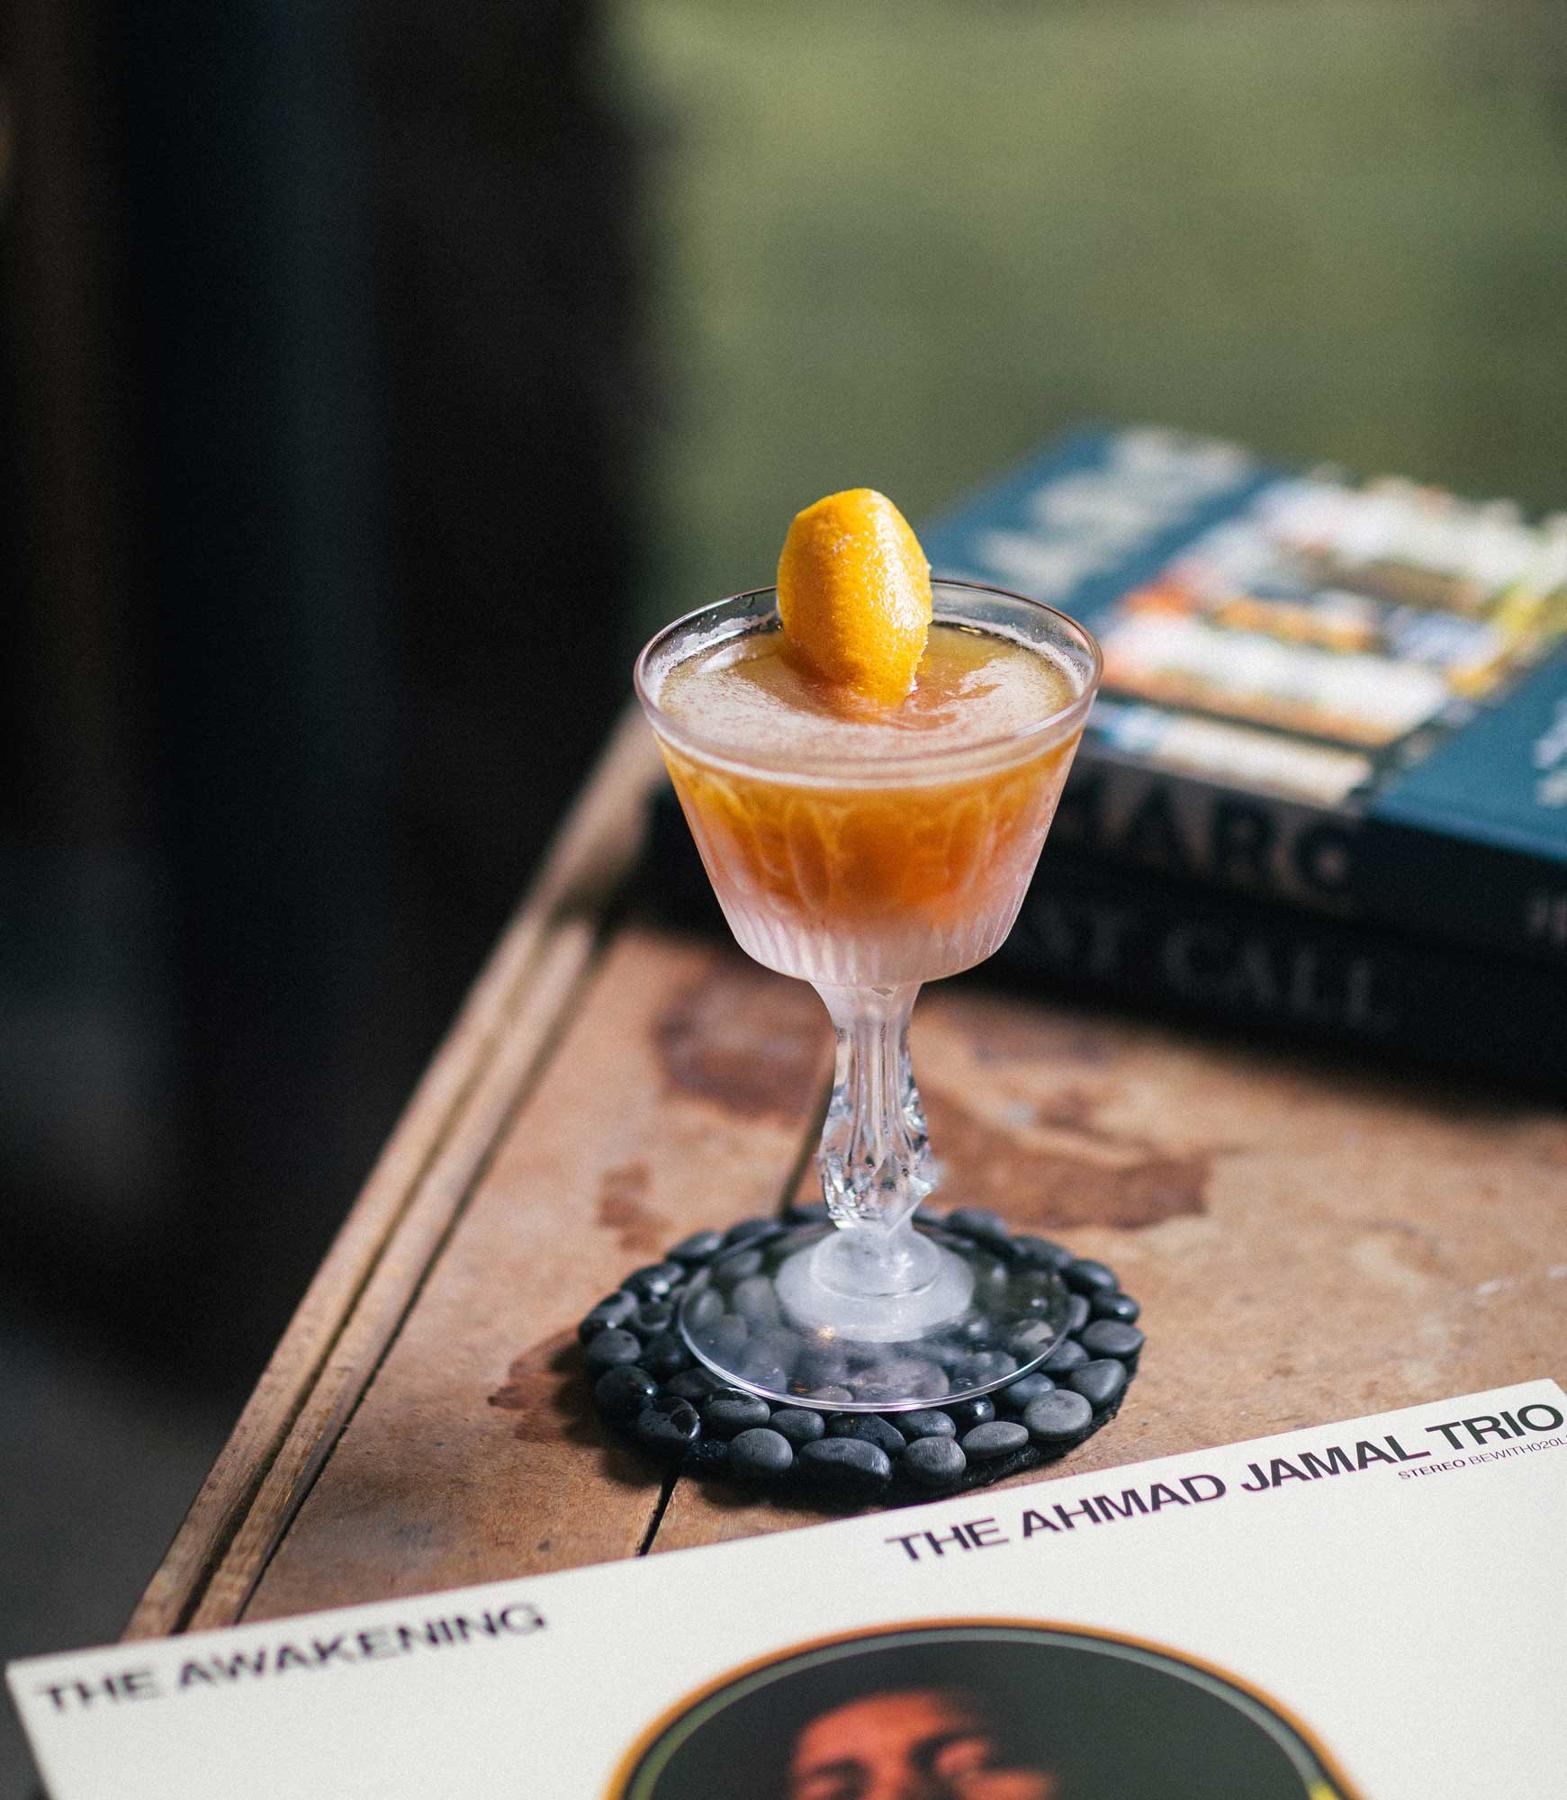 An example of the Lush Interlude, the mixed drink (drink), by Braden LaGrone, Cure, New Orleans, featuring Amaro Sfumato Rabarbaro, brown rum, lime juice, orange brandy, rich demerara syrup, and orange twist; photo by S. Kallstrand